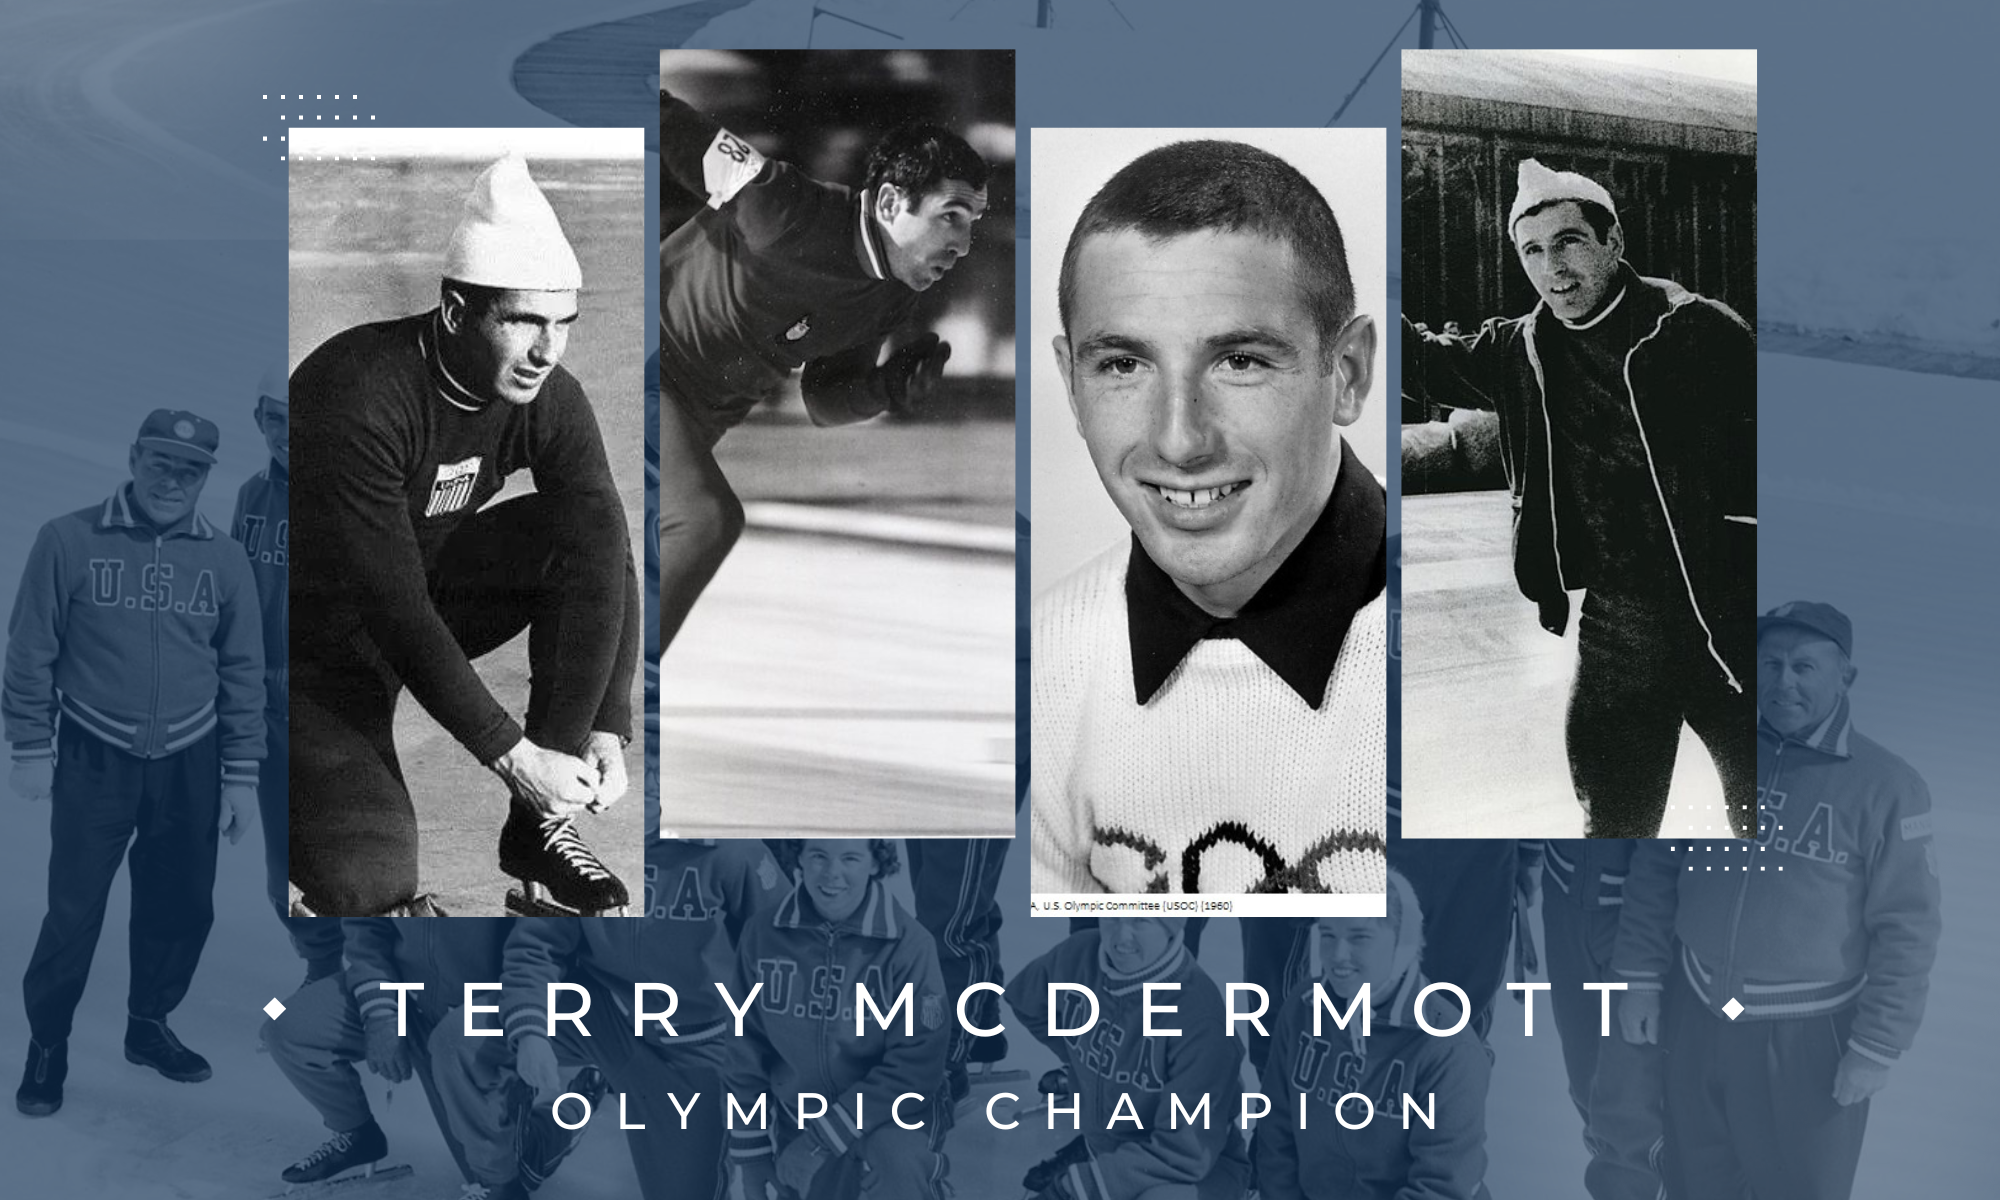 Terry McDermott was the only gold medallist from the United States at the 1964 Innsbruck Winter Olympics©US Speedskating